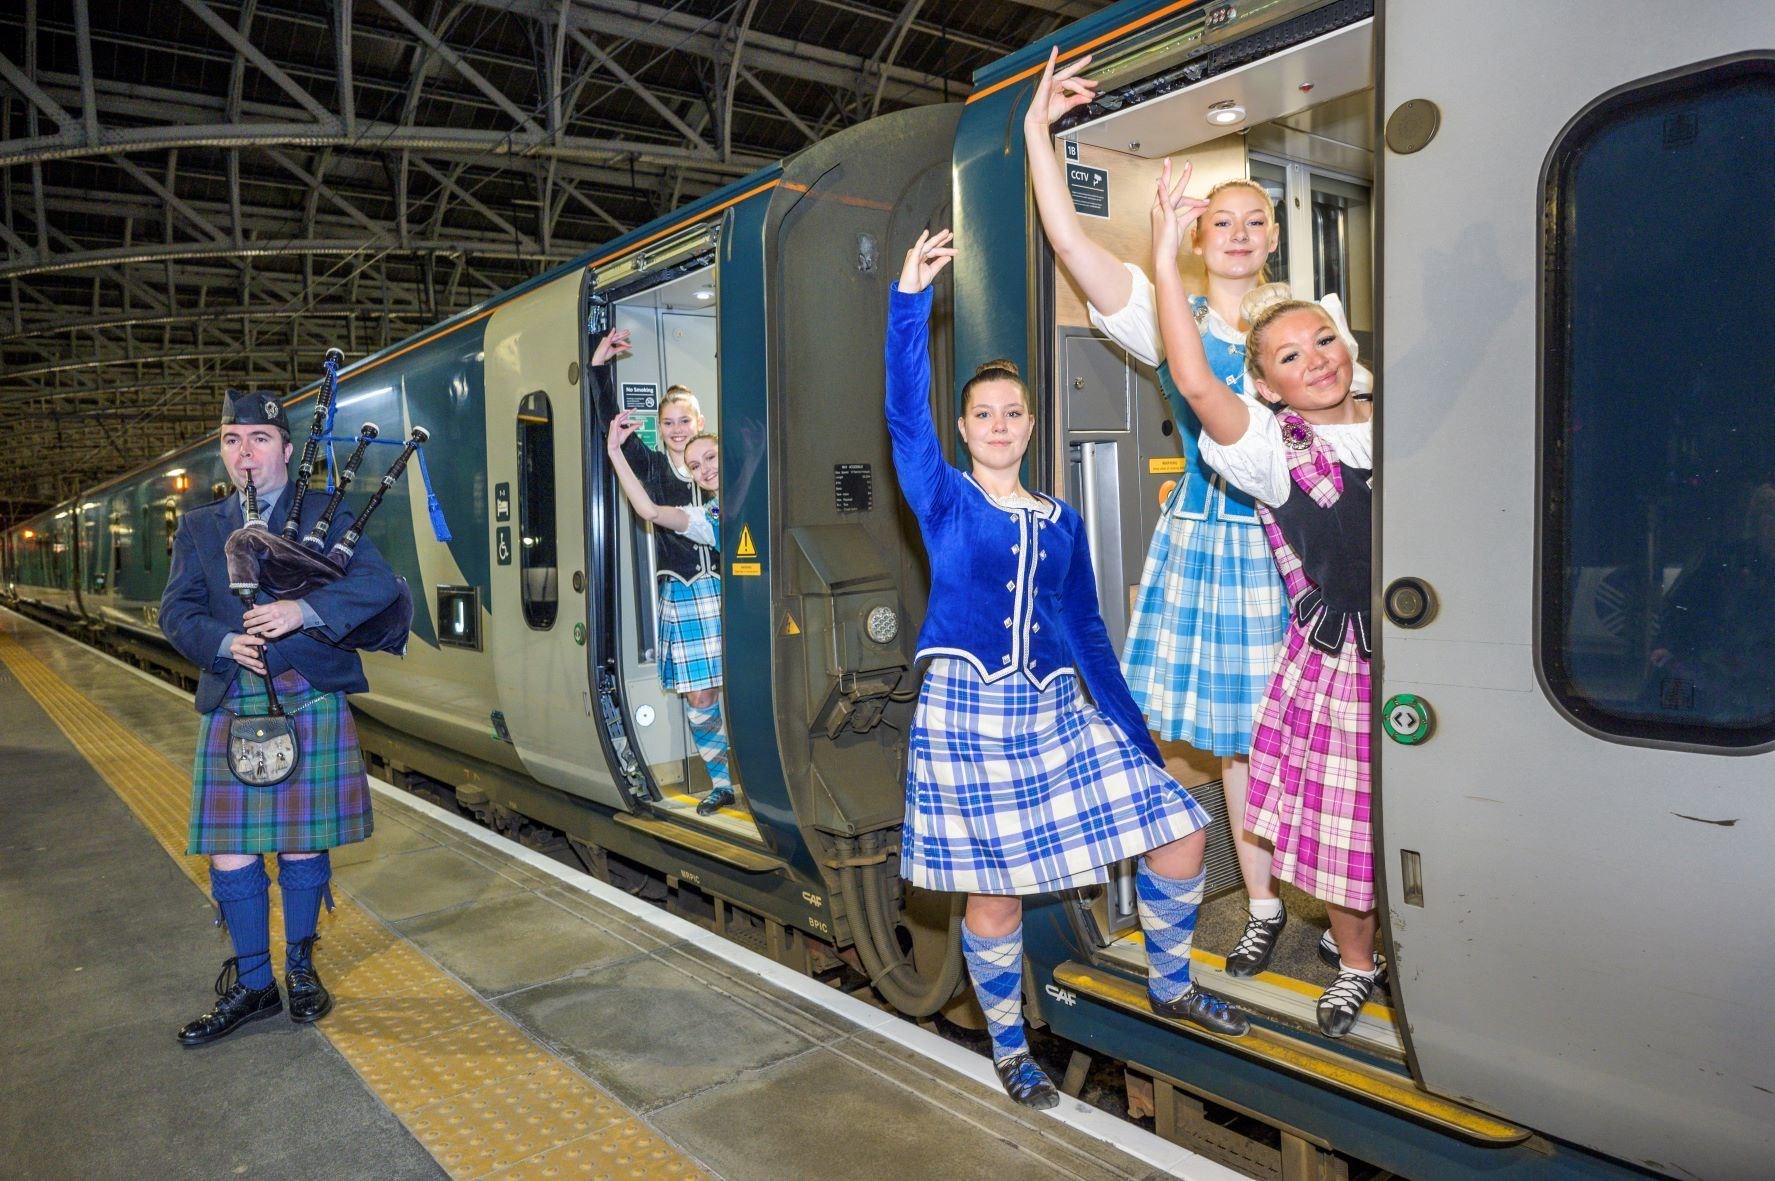 The Caledonian Sleeper marked the anniversary earlier this month by a piper and complimentary whiskies. Picture: Wattie Cheung.